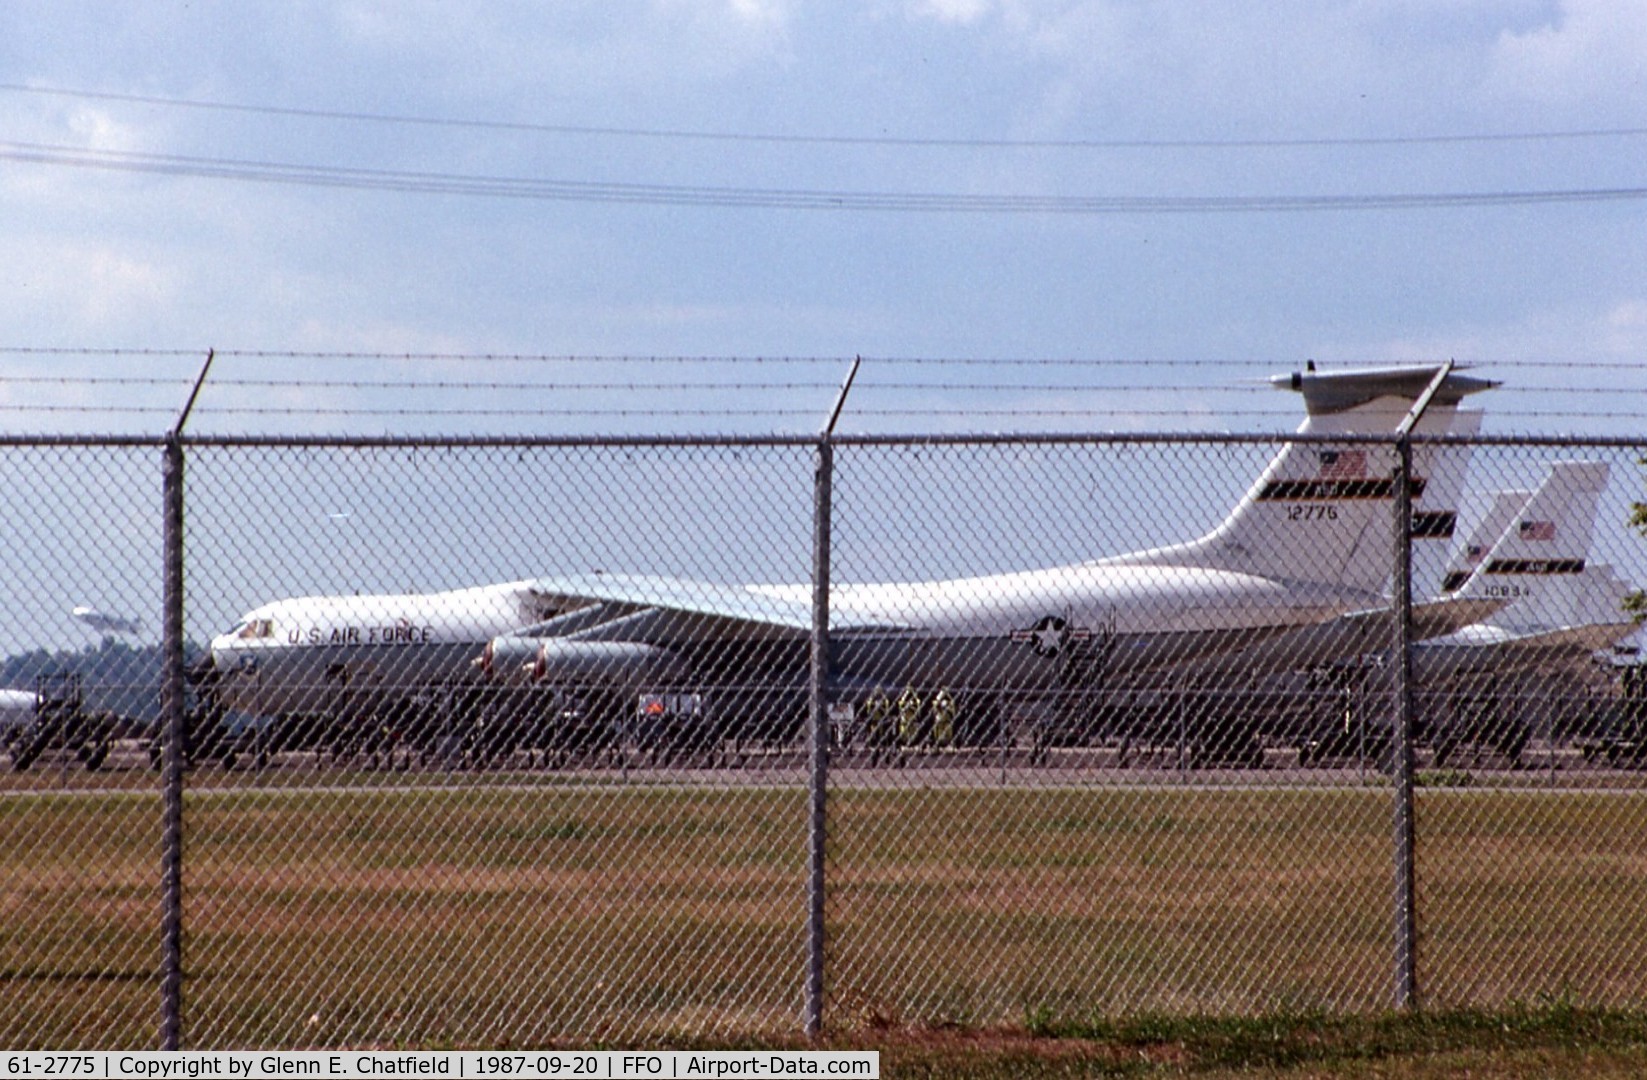 61-2775, 1963 Lockheed NC-141A Starlifter C/N 300-6001, NC-141A of the Aeronautical Systems Division